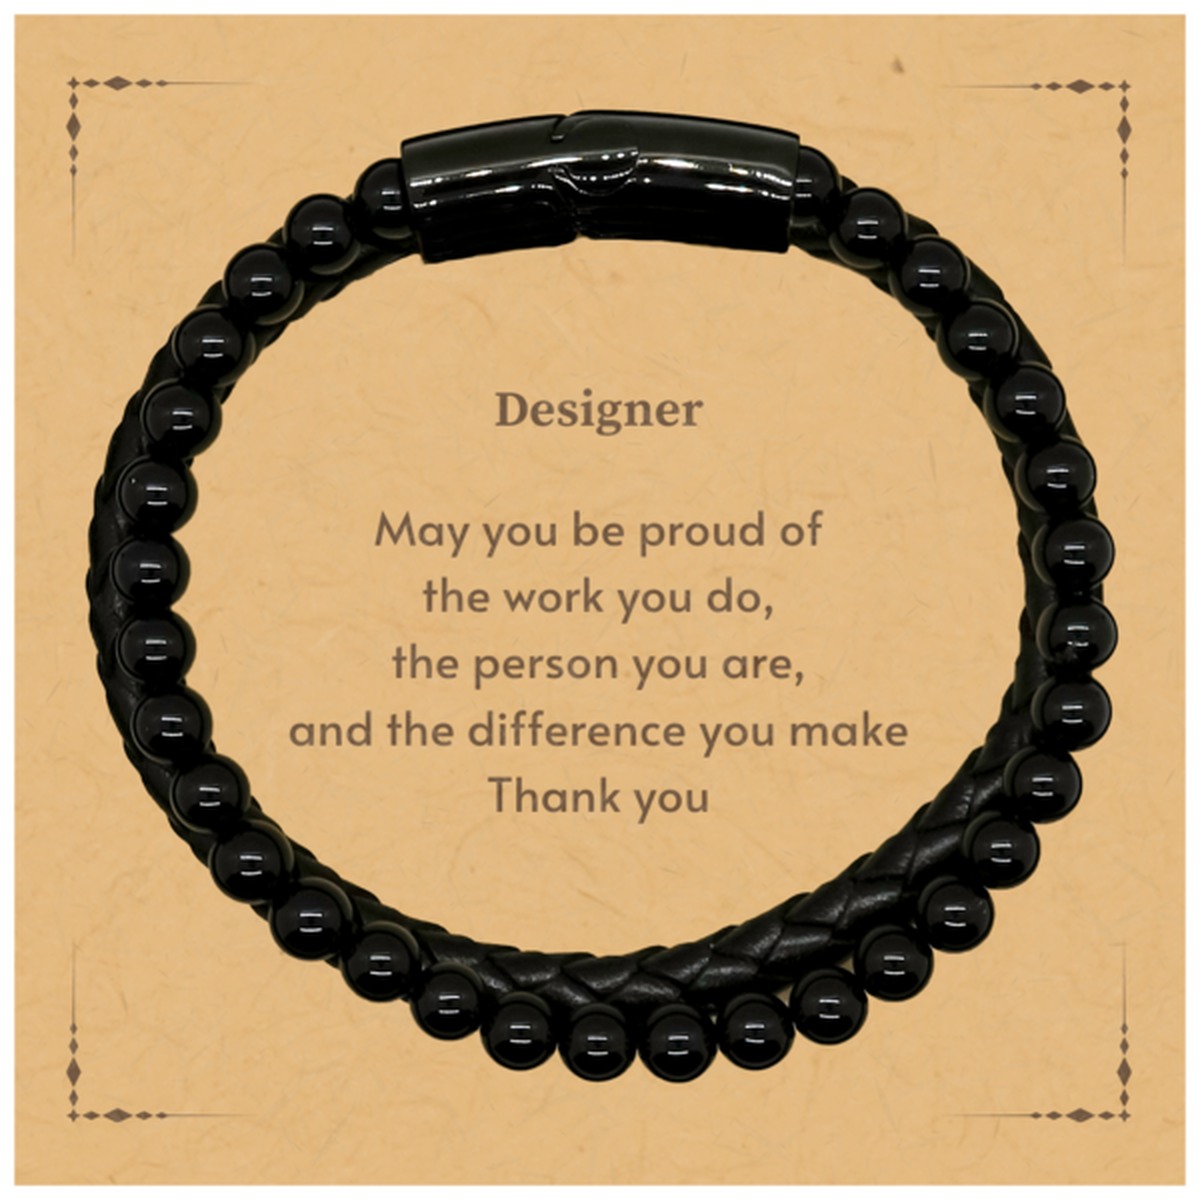 Heartwarming Stone Leather Bracelets Retirement Coworkers Gifts for Designer, Designer May You be proud of the work you do, the person you are Gifts for Boss Men Women Friends